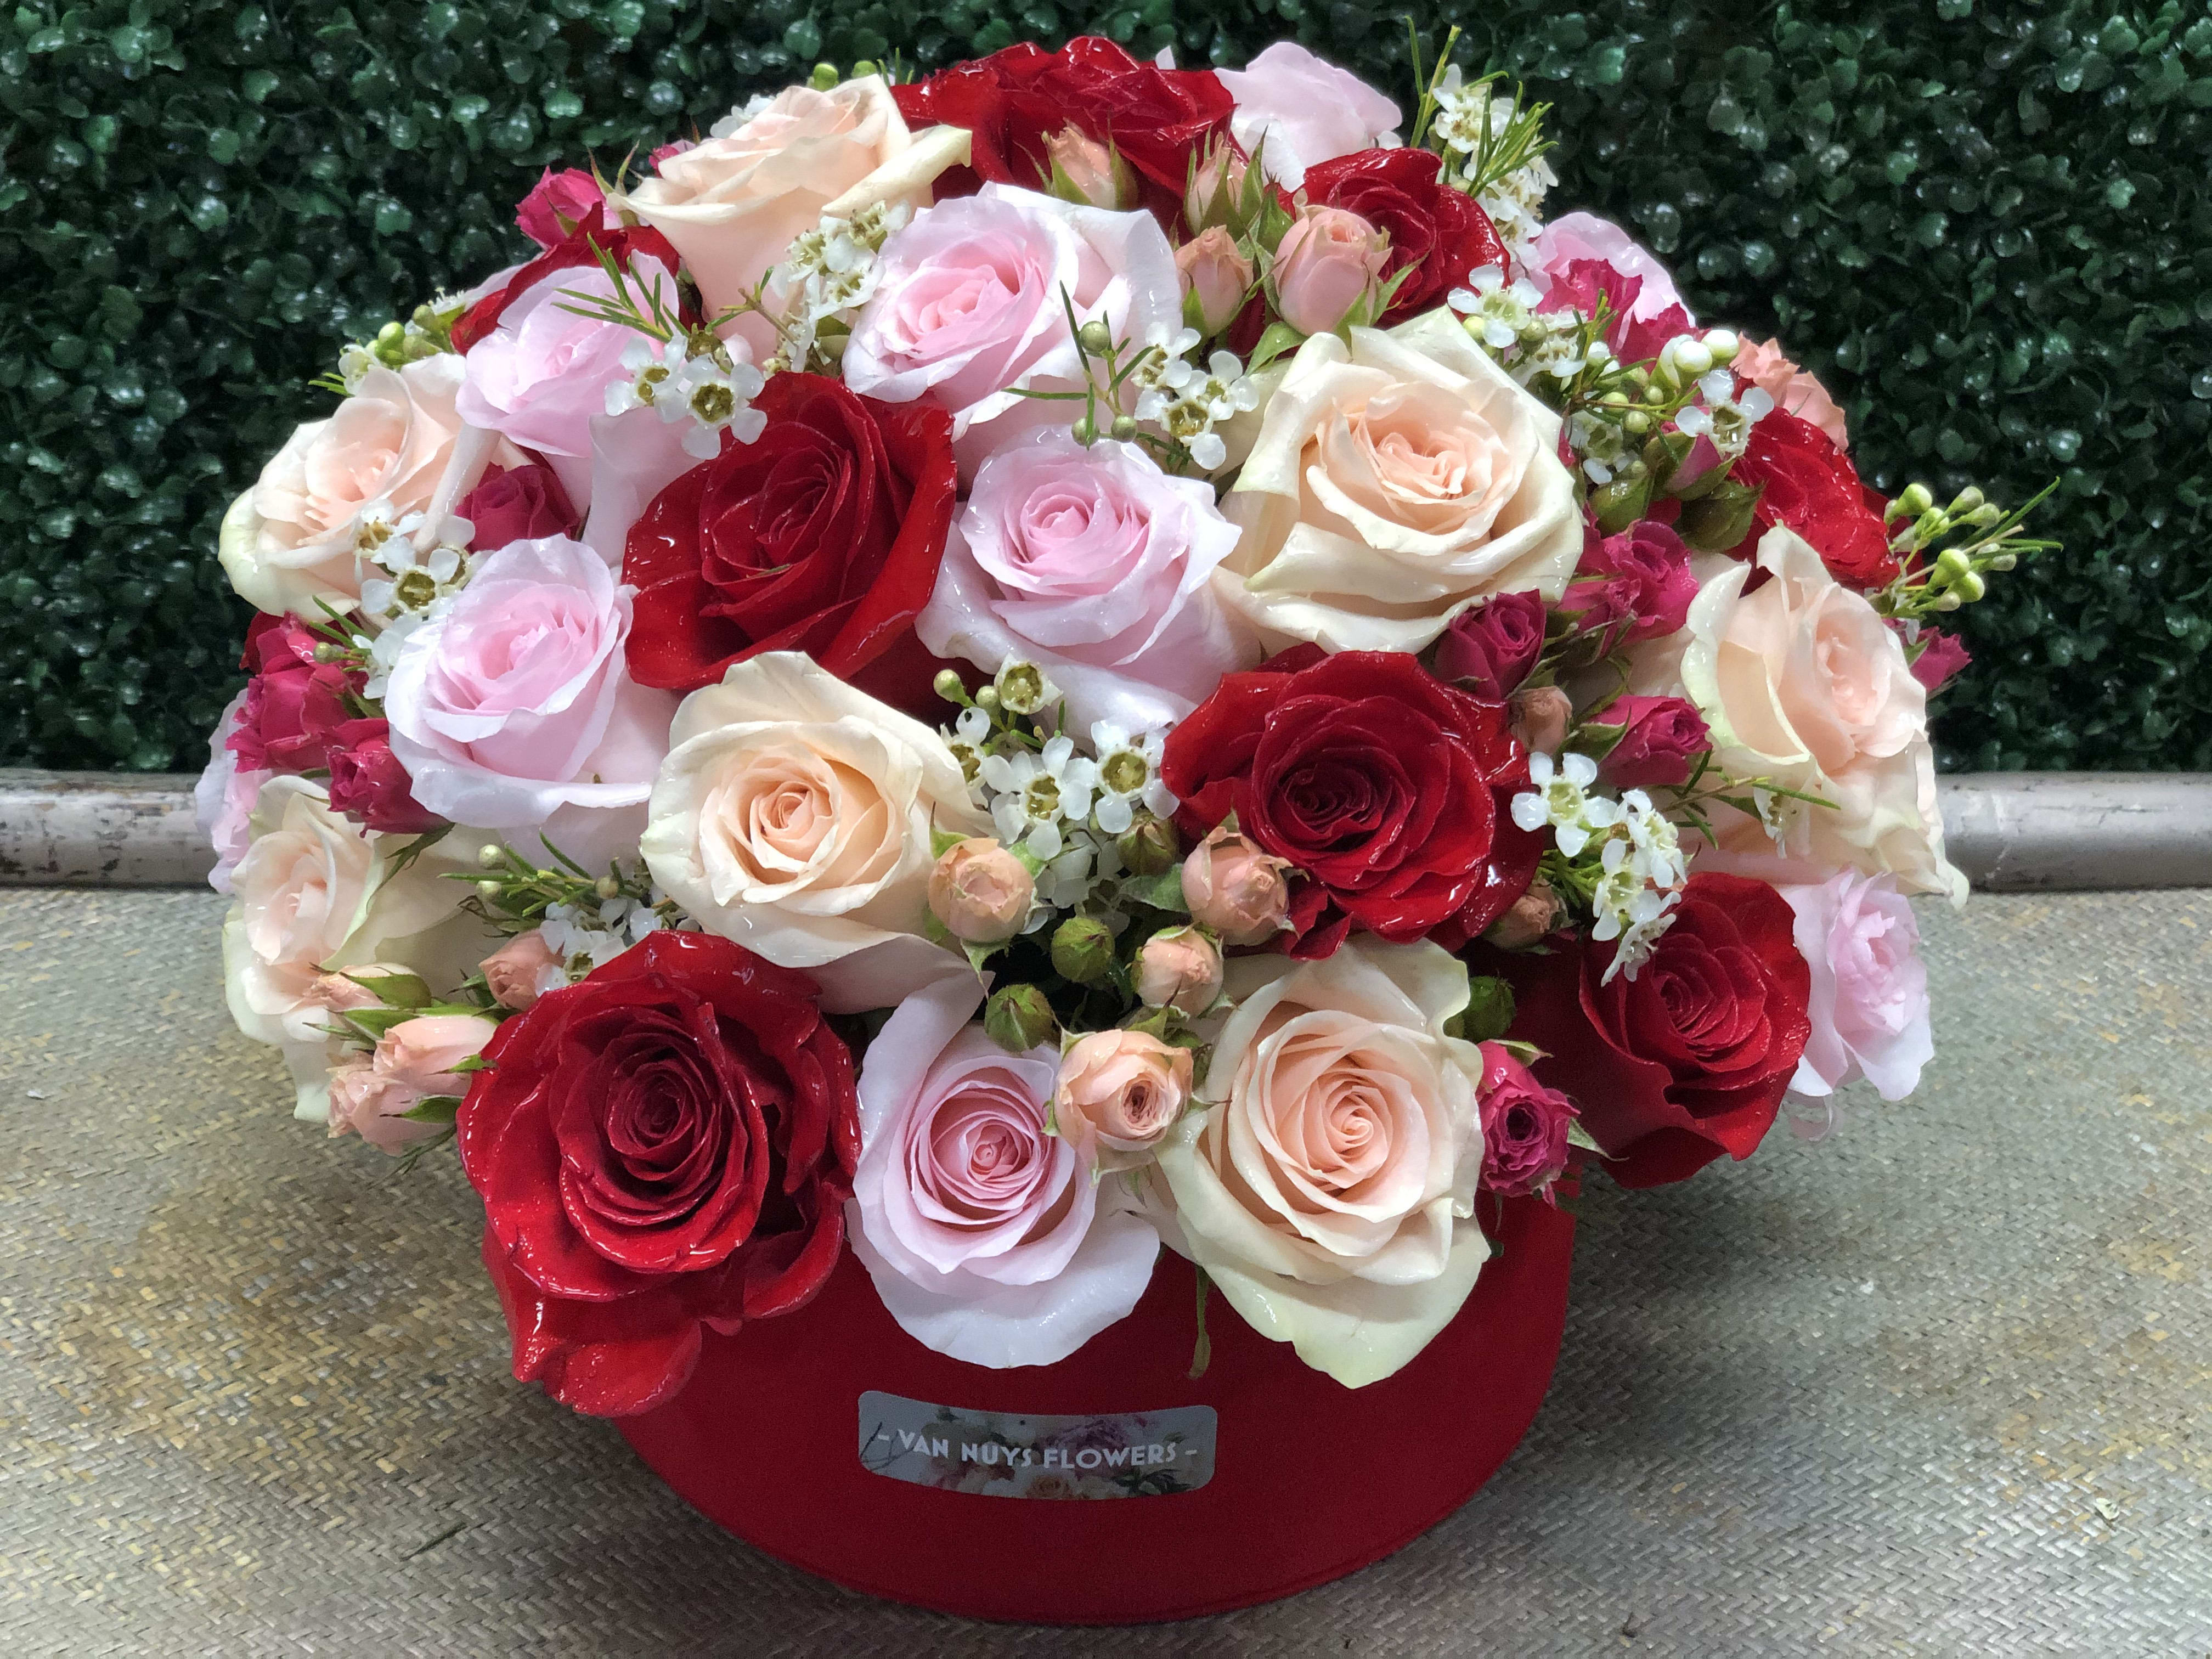 BLOOMING BEAUTY - A MIXTURE OF RED,PINK AND PEACH ROSES MAKE FOR A STUNNING FLORAL. ROSES, SPRAY ROSE,WAX FLOWER